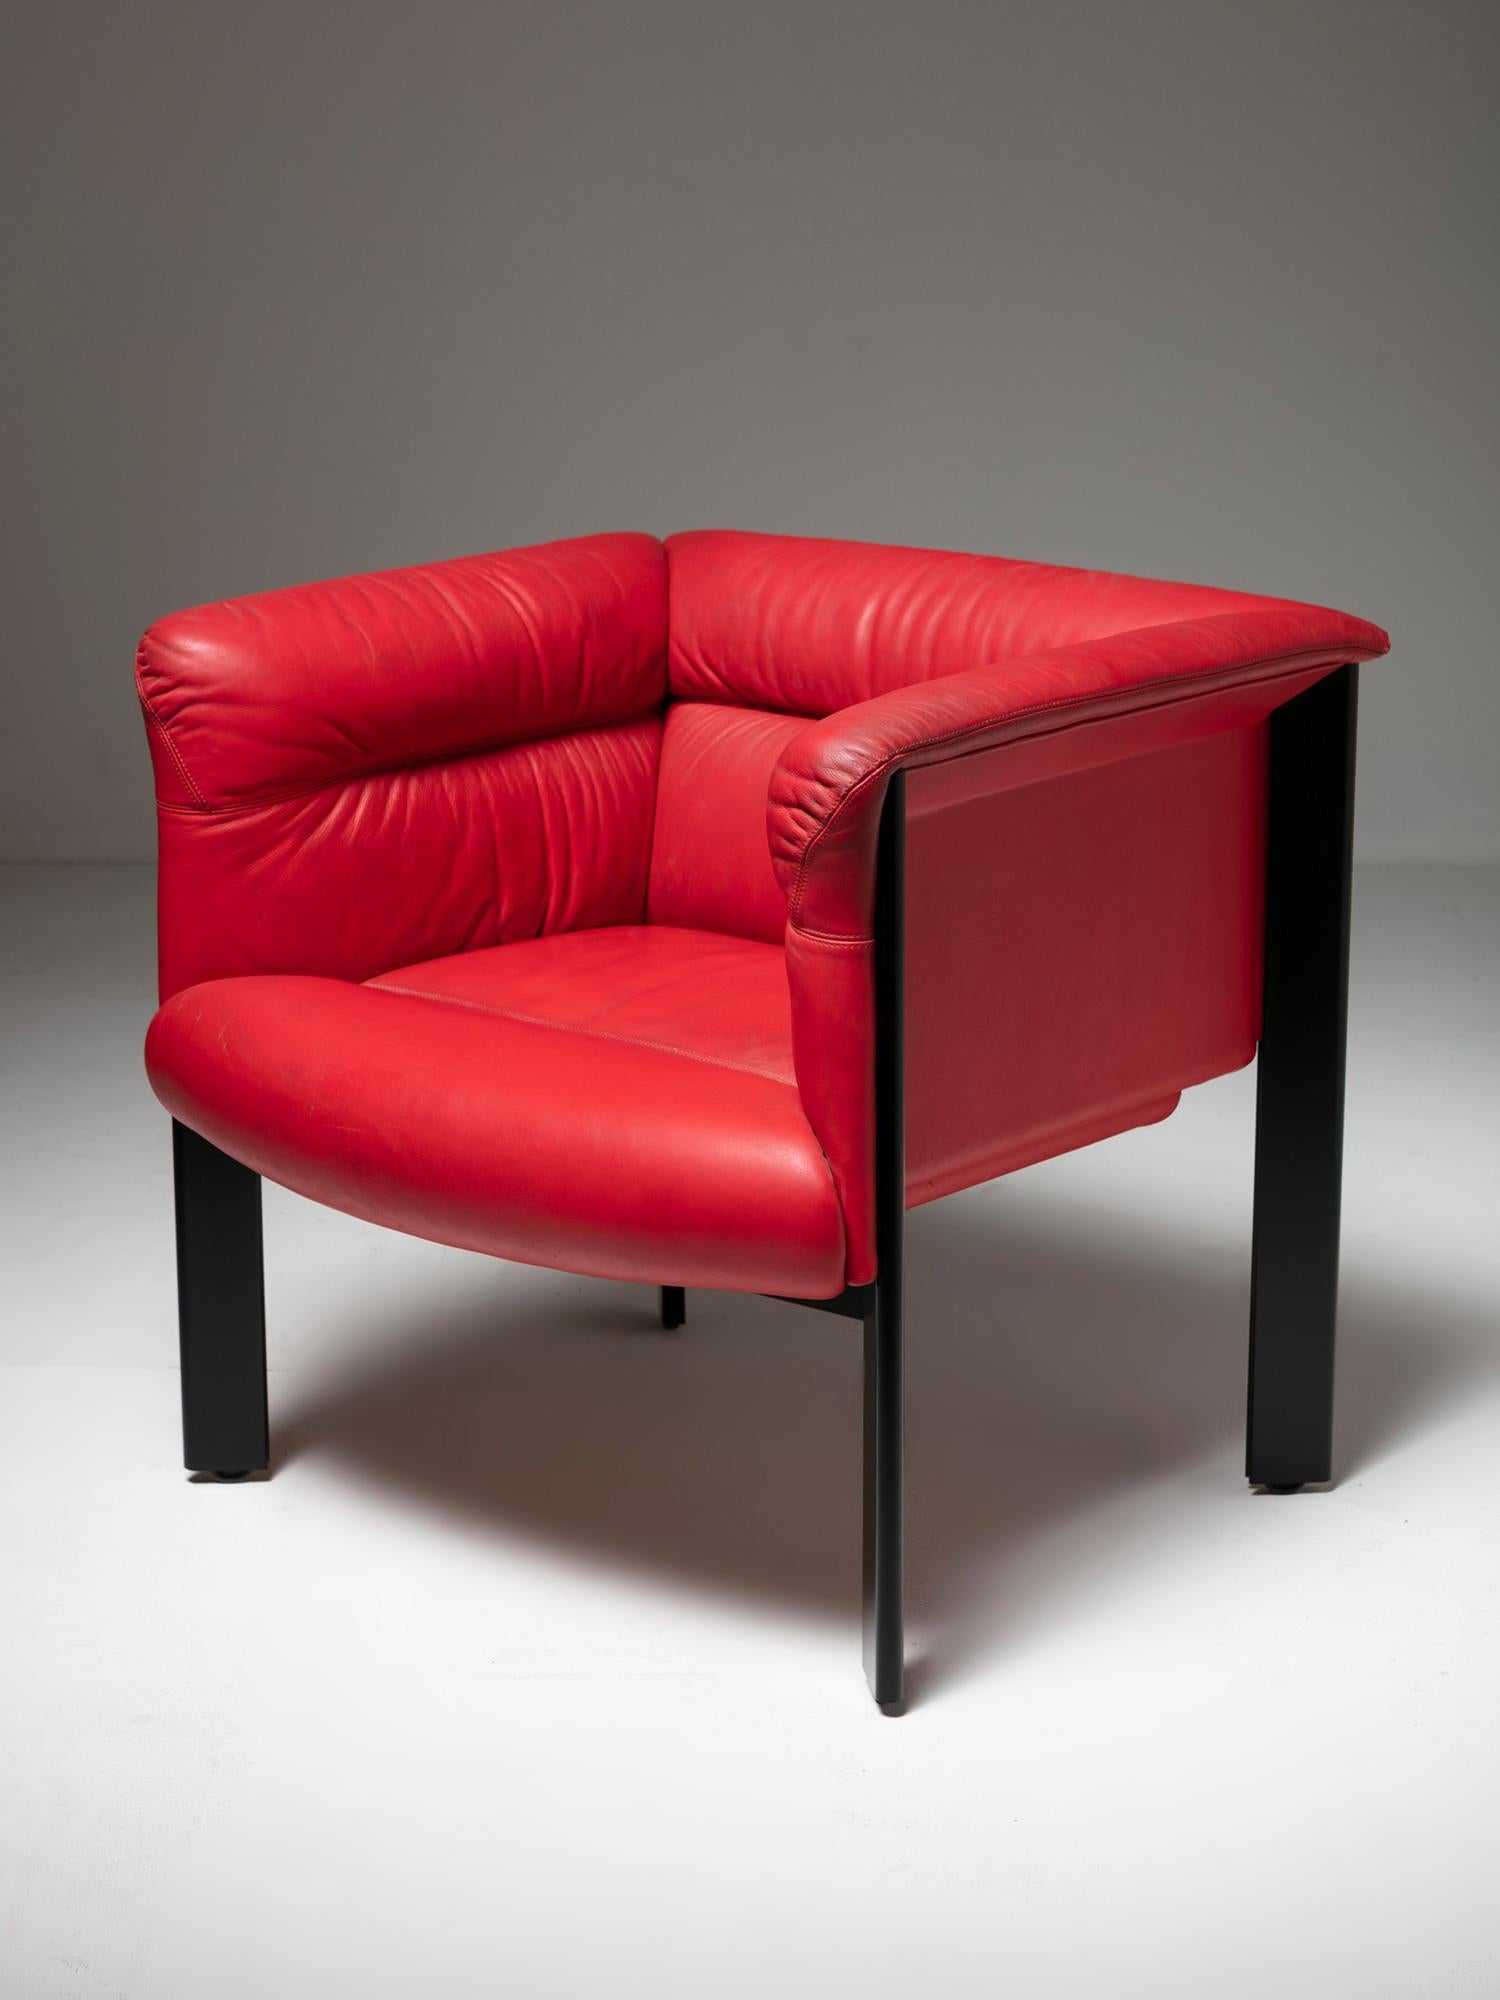 Rare set of interlude chairs by Marco Zanuso for Poltrona Frau.
Compact piece with bent steel frame and high quality red leather.
This model was especially designed to celebrate 75th anniversary of Poltrona Frau manufacturer.